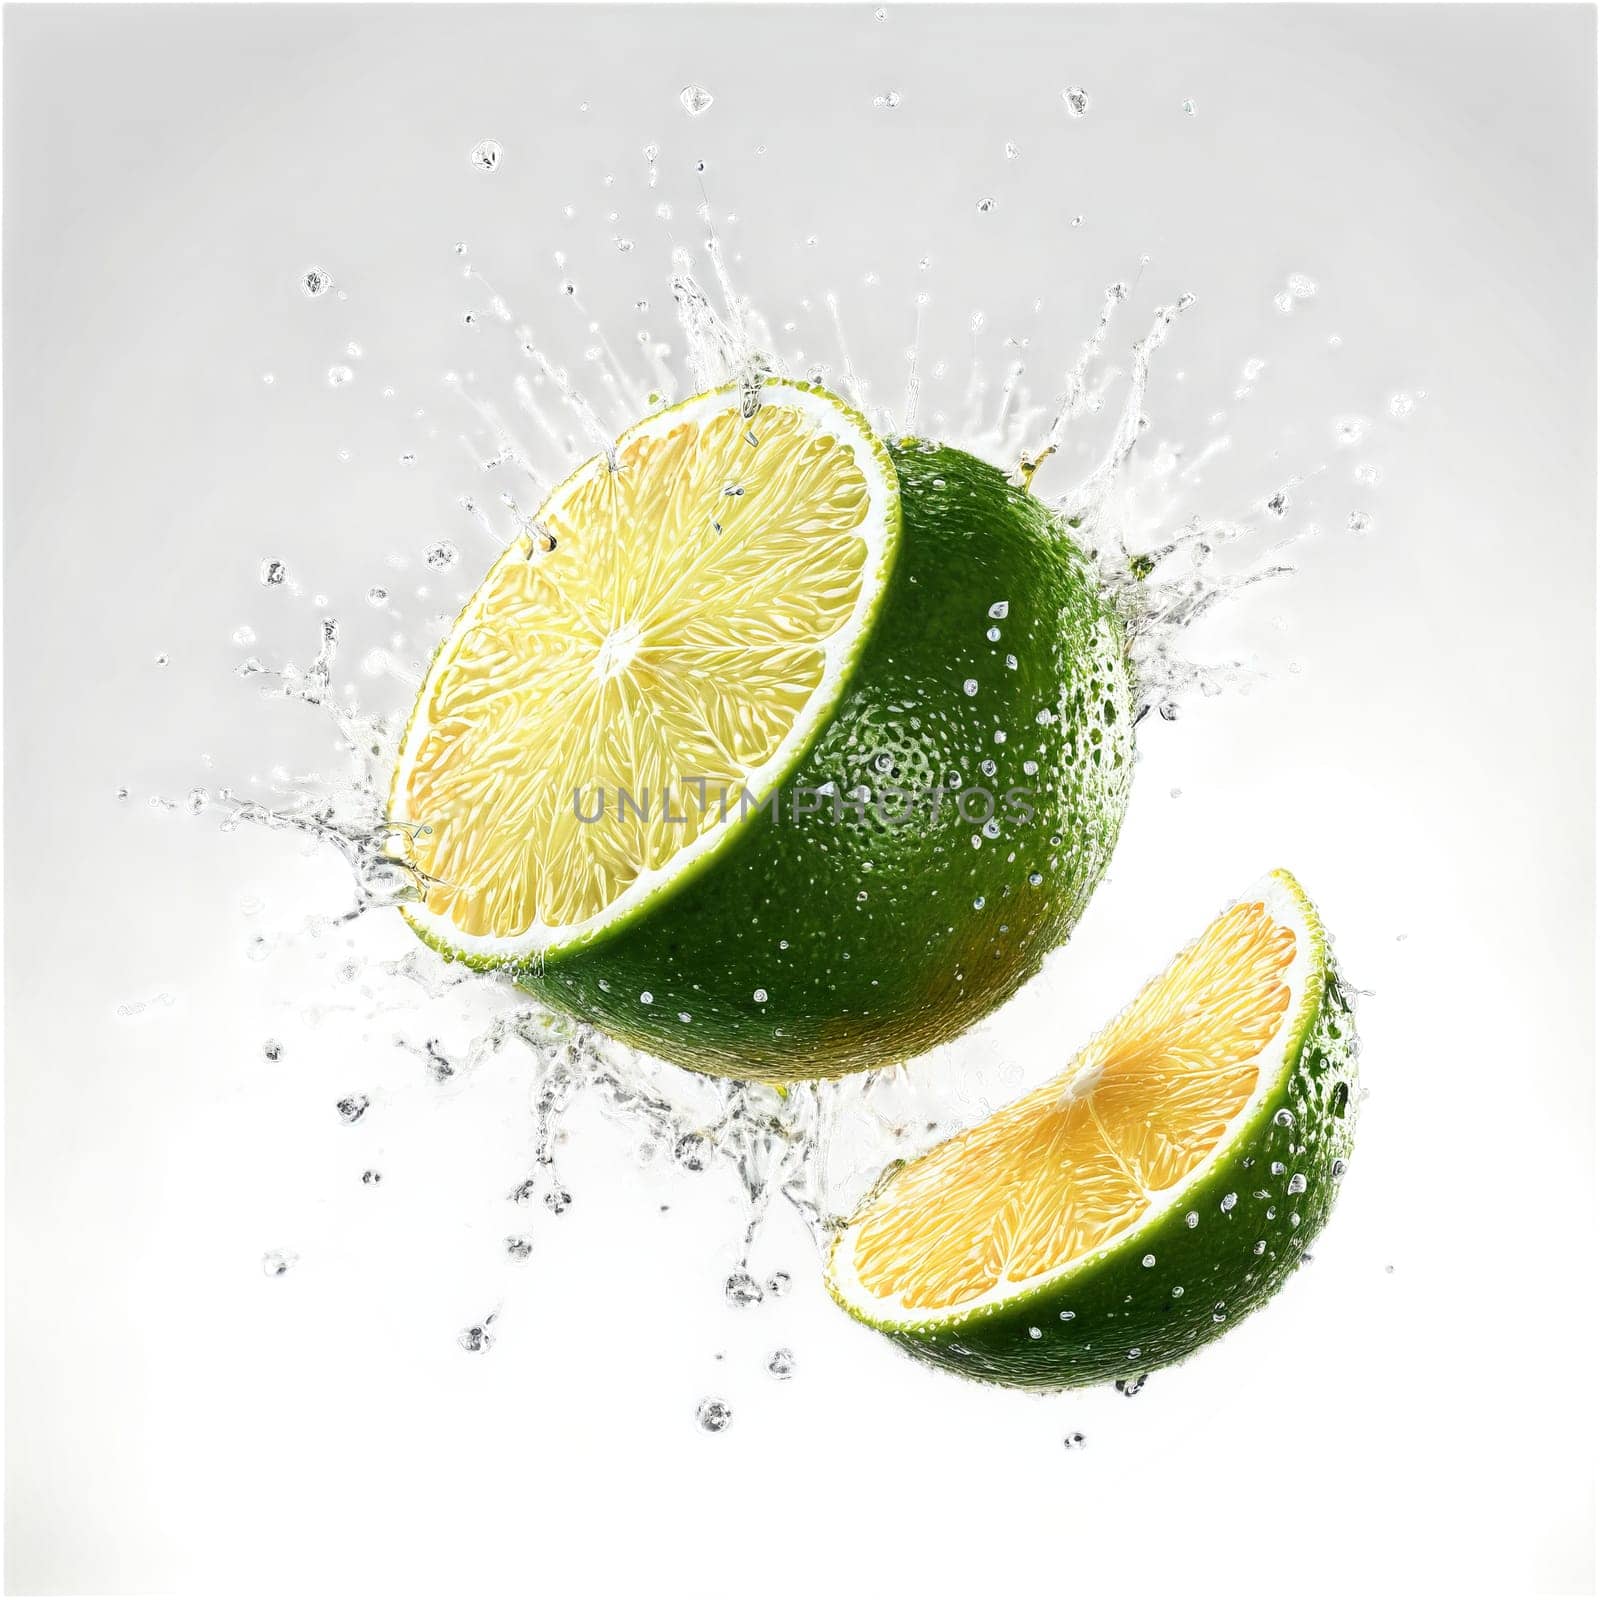 Tangy limes bursting zest misting juice droplets midair Citrus aurantifolia Food and Culinary concept by panophotograph